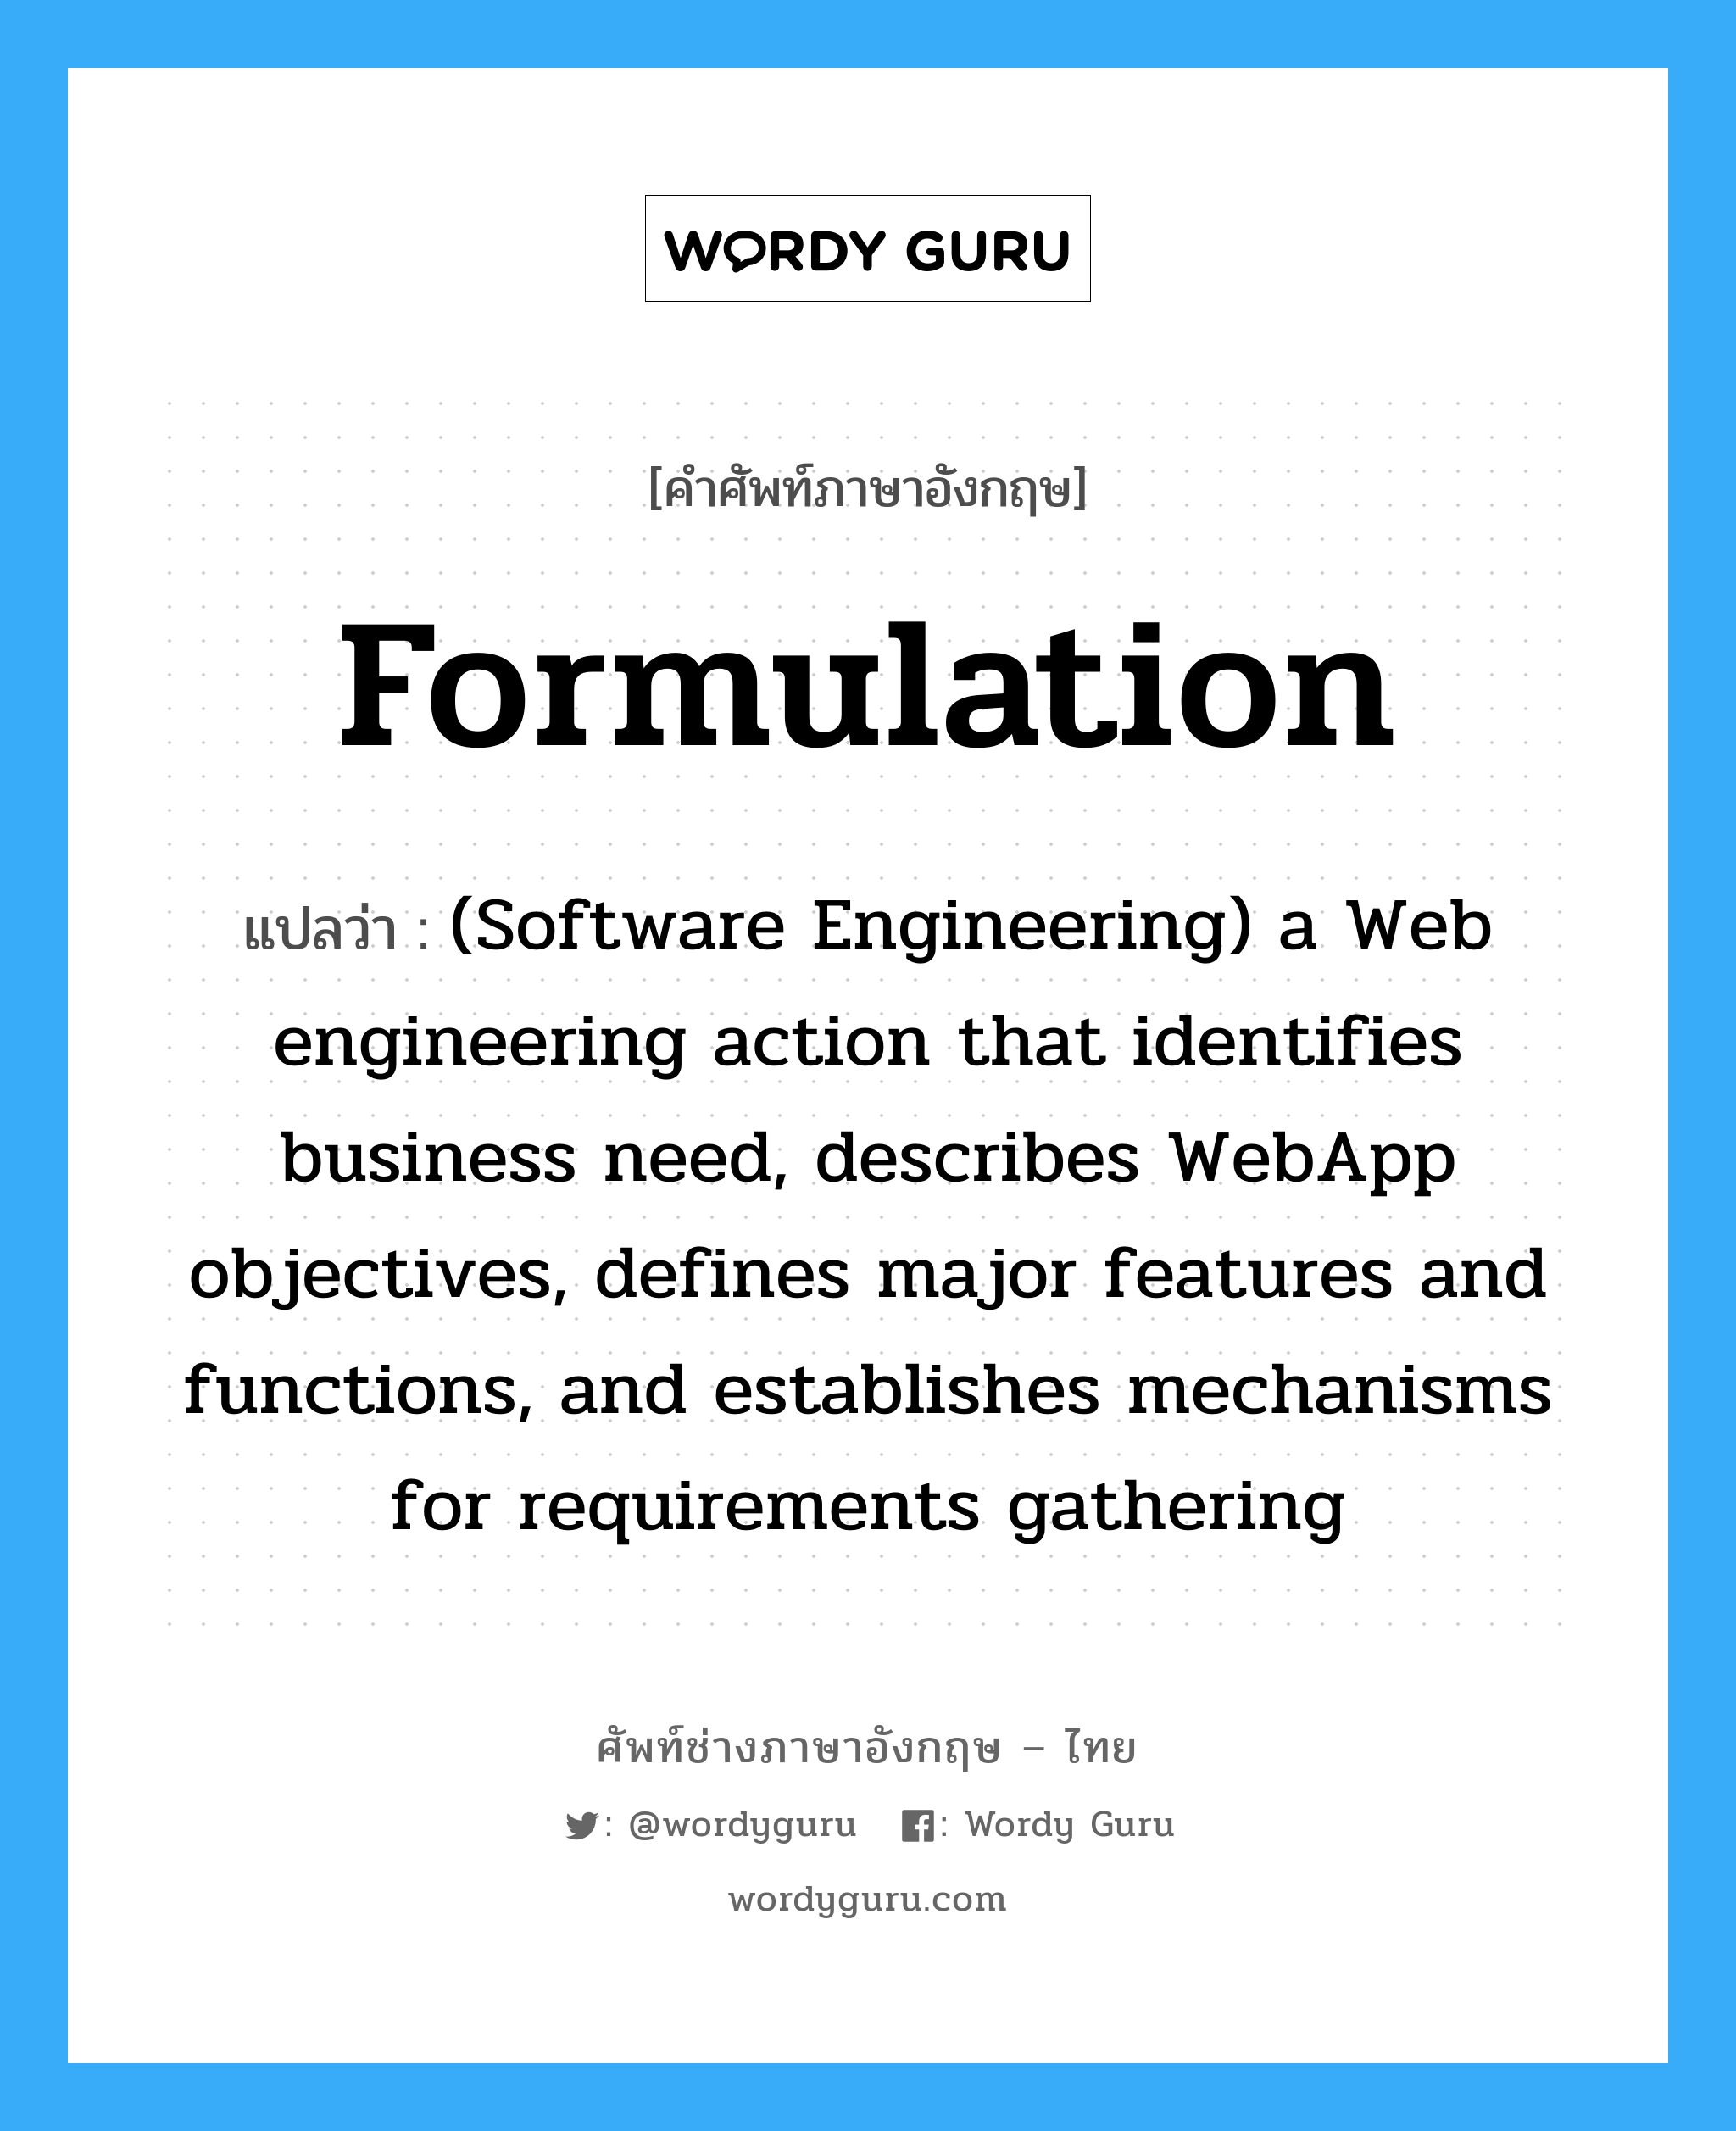 Formulation แปลว่า?, คำศัพท์ช่างภาษาอังกฤษ - ไทย Formulation คำศัพท์ภาษาอังกฤษ Formulation แปลว่า (Software Engineering) a Web engineering action that identifies business need, describes WebApp objectives, defines major features and functions, and establishes mechanisms for requirements gathering